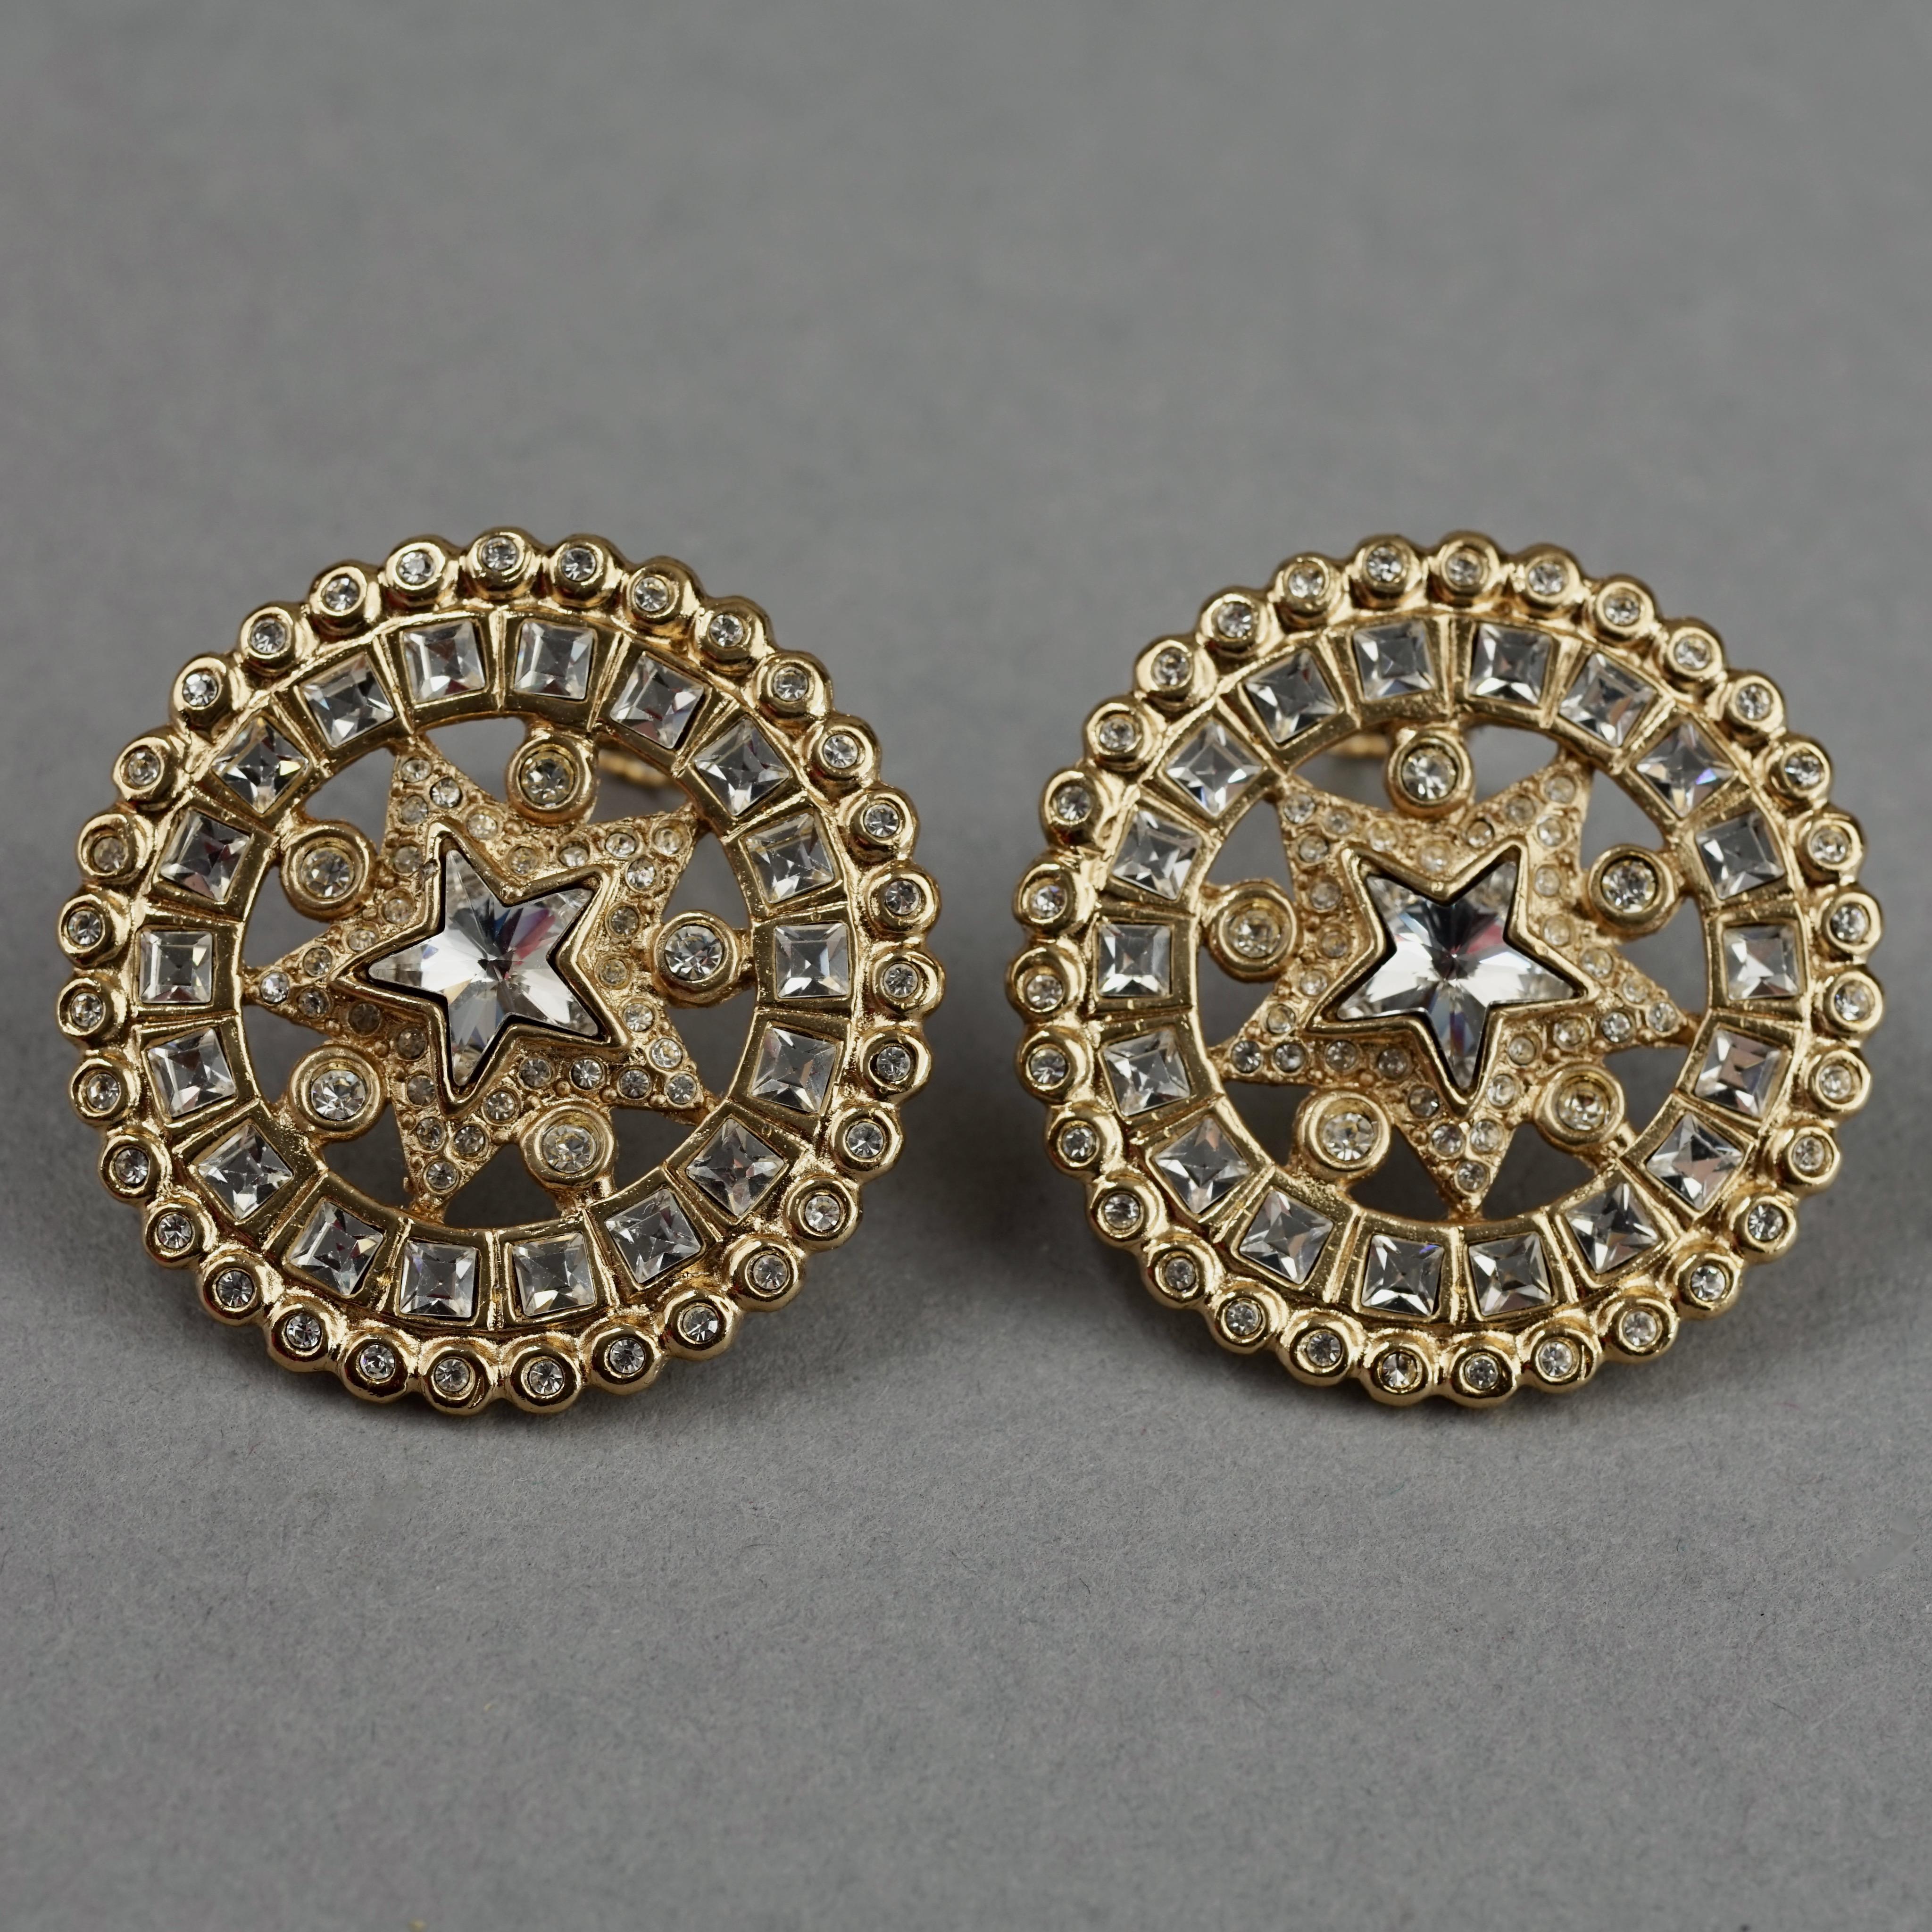 Vintage YVES SAINT LAURENT Ysl Star Rhinestone Medallion Disc Earrings In Excellent Condition For Sale In Kingersheim, Alsace